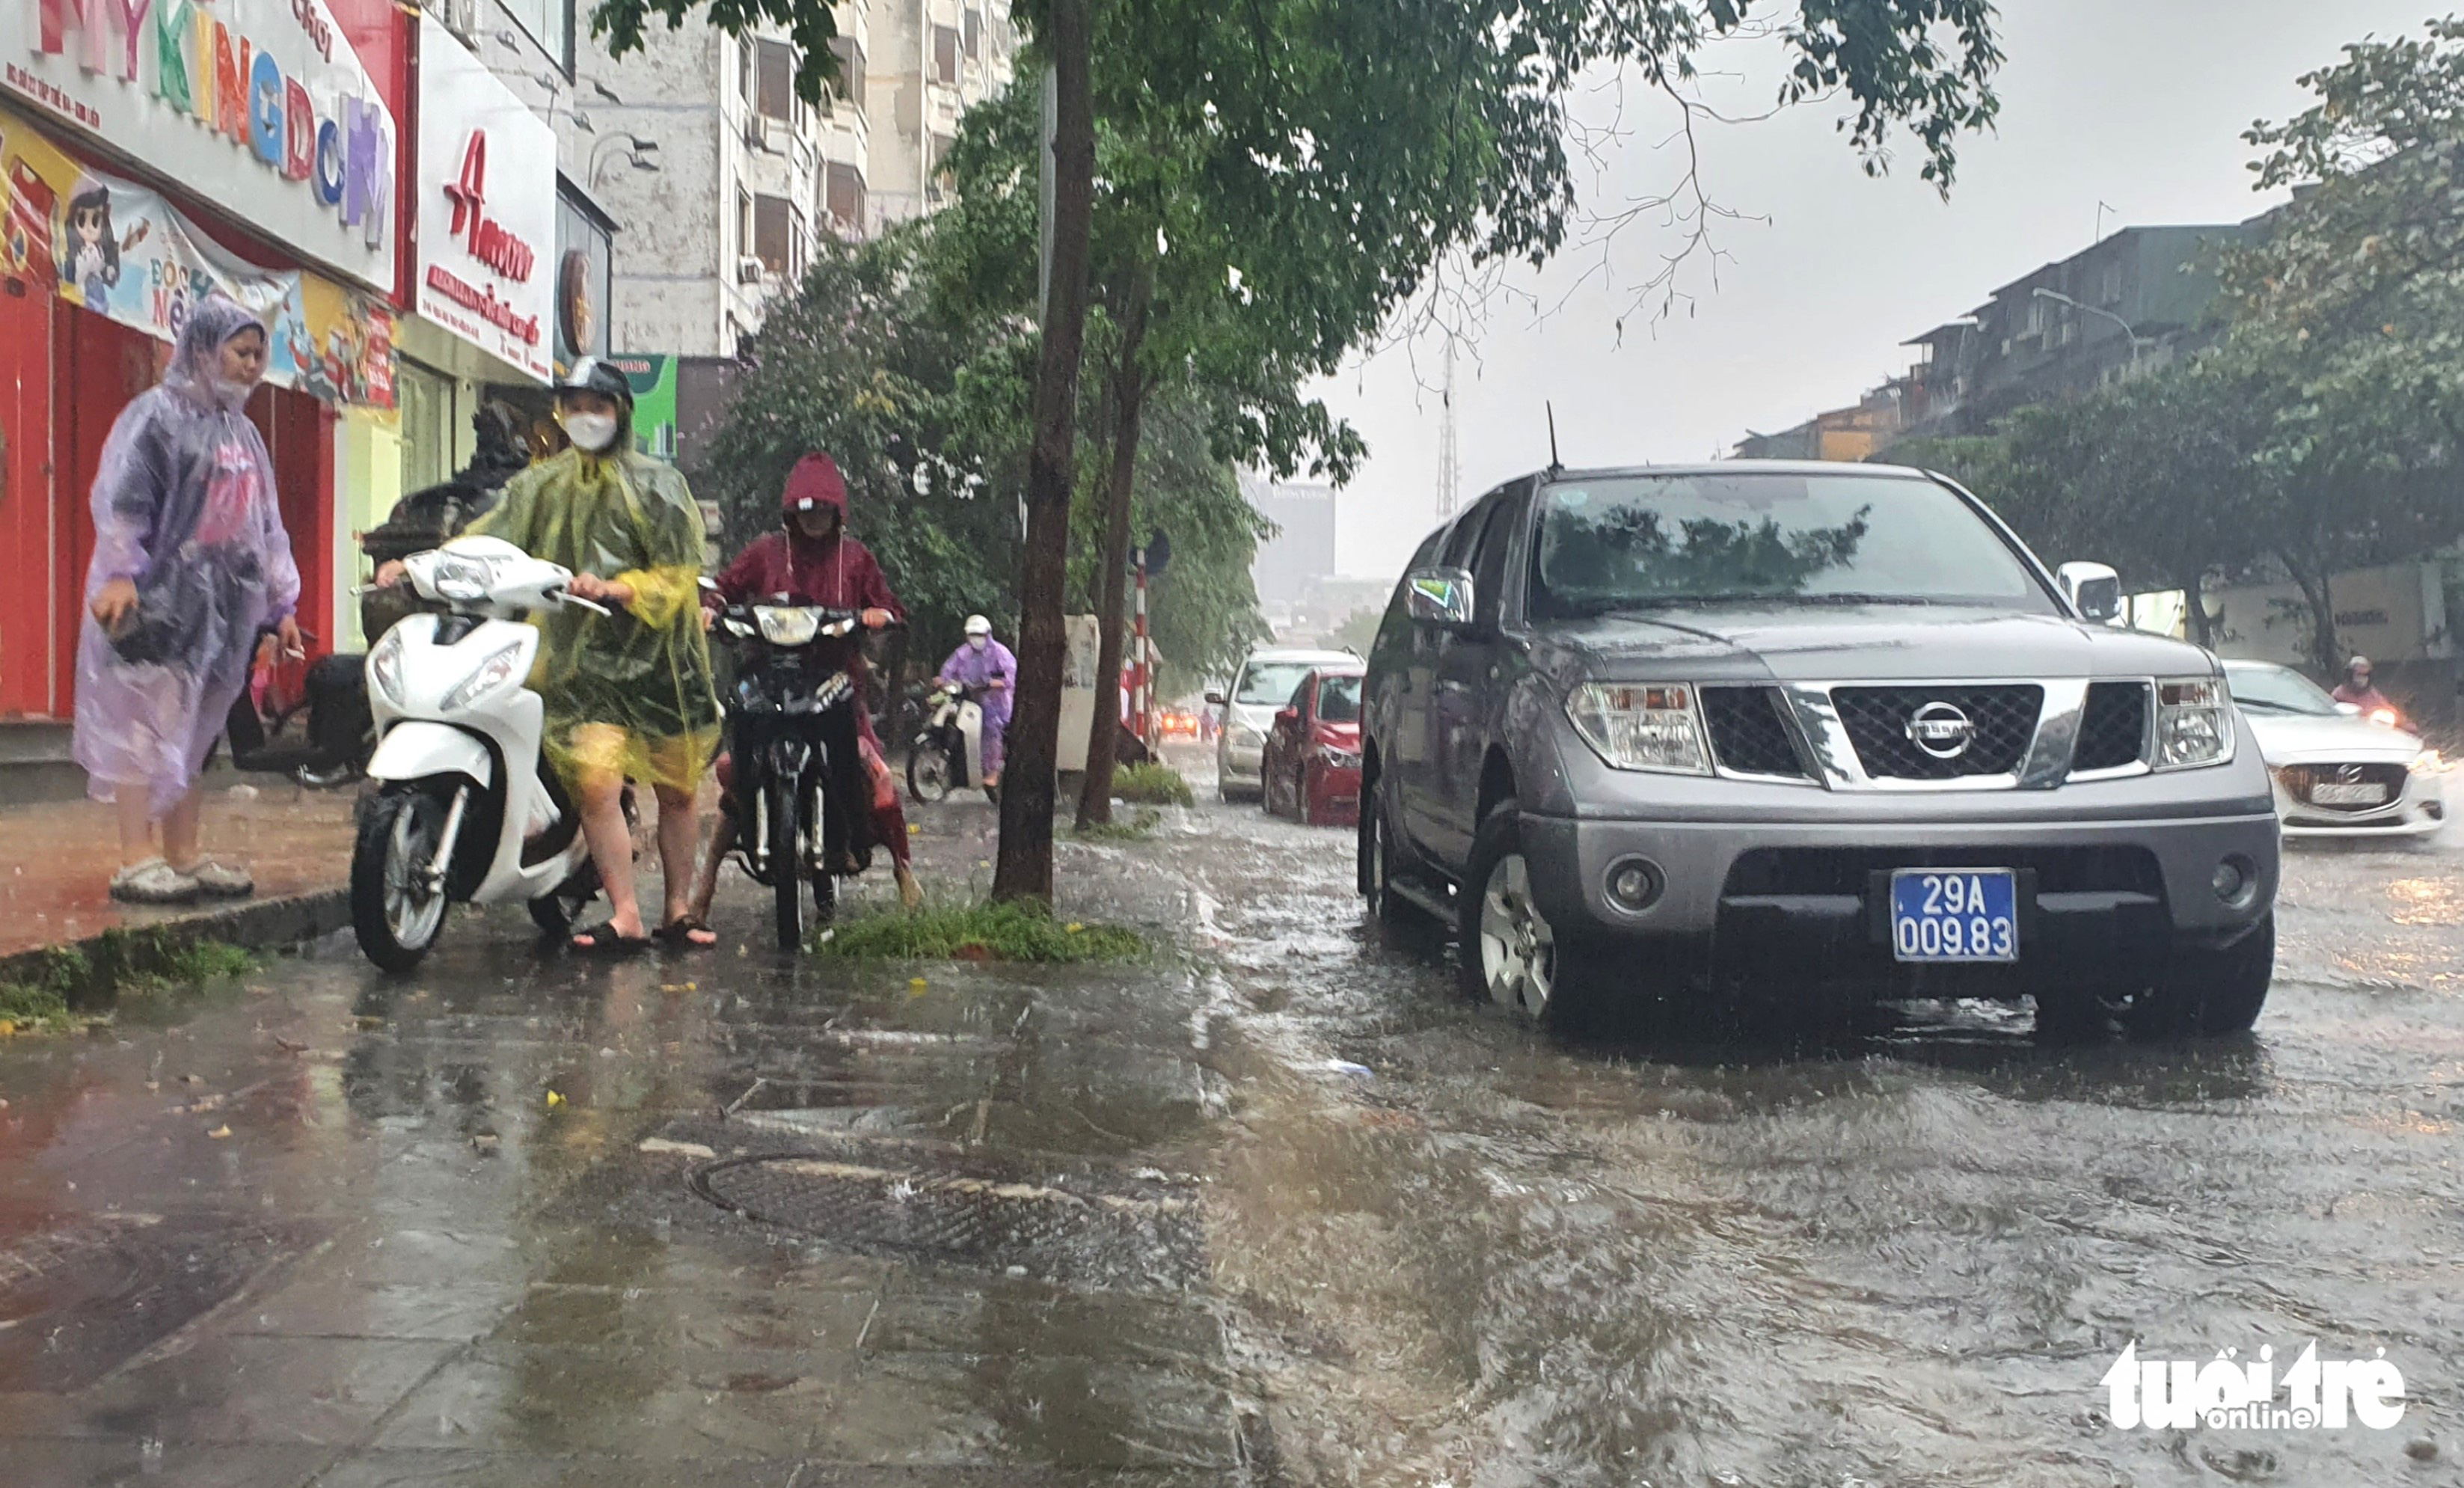 People walk their motorbikes on the sidewalk of flooded Pham Ngoc Thach Street in Dong Da District, Hanoi, May 29, 2022. Photo: Ha Quan / Tuoi Tre